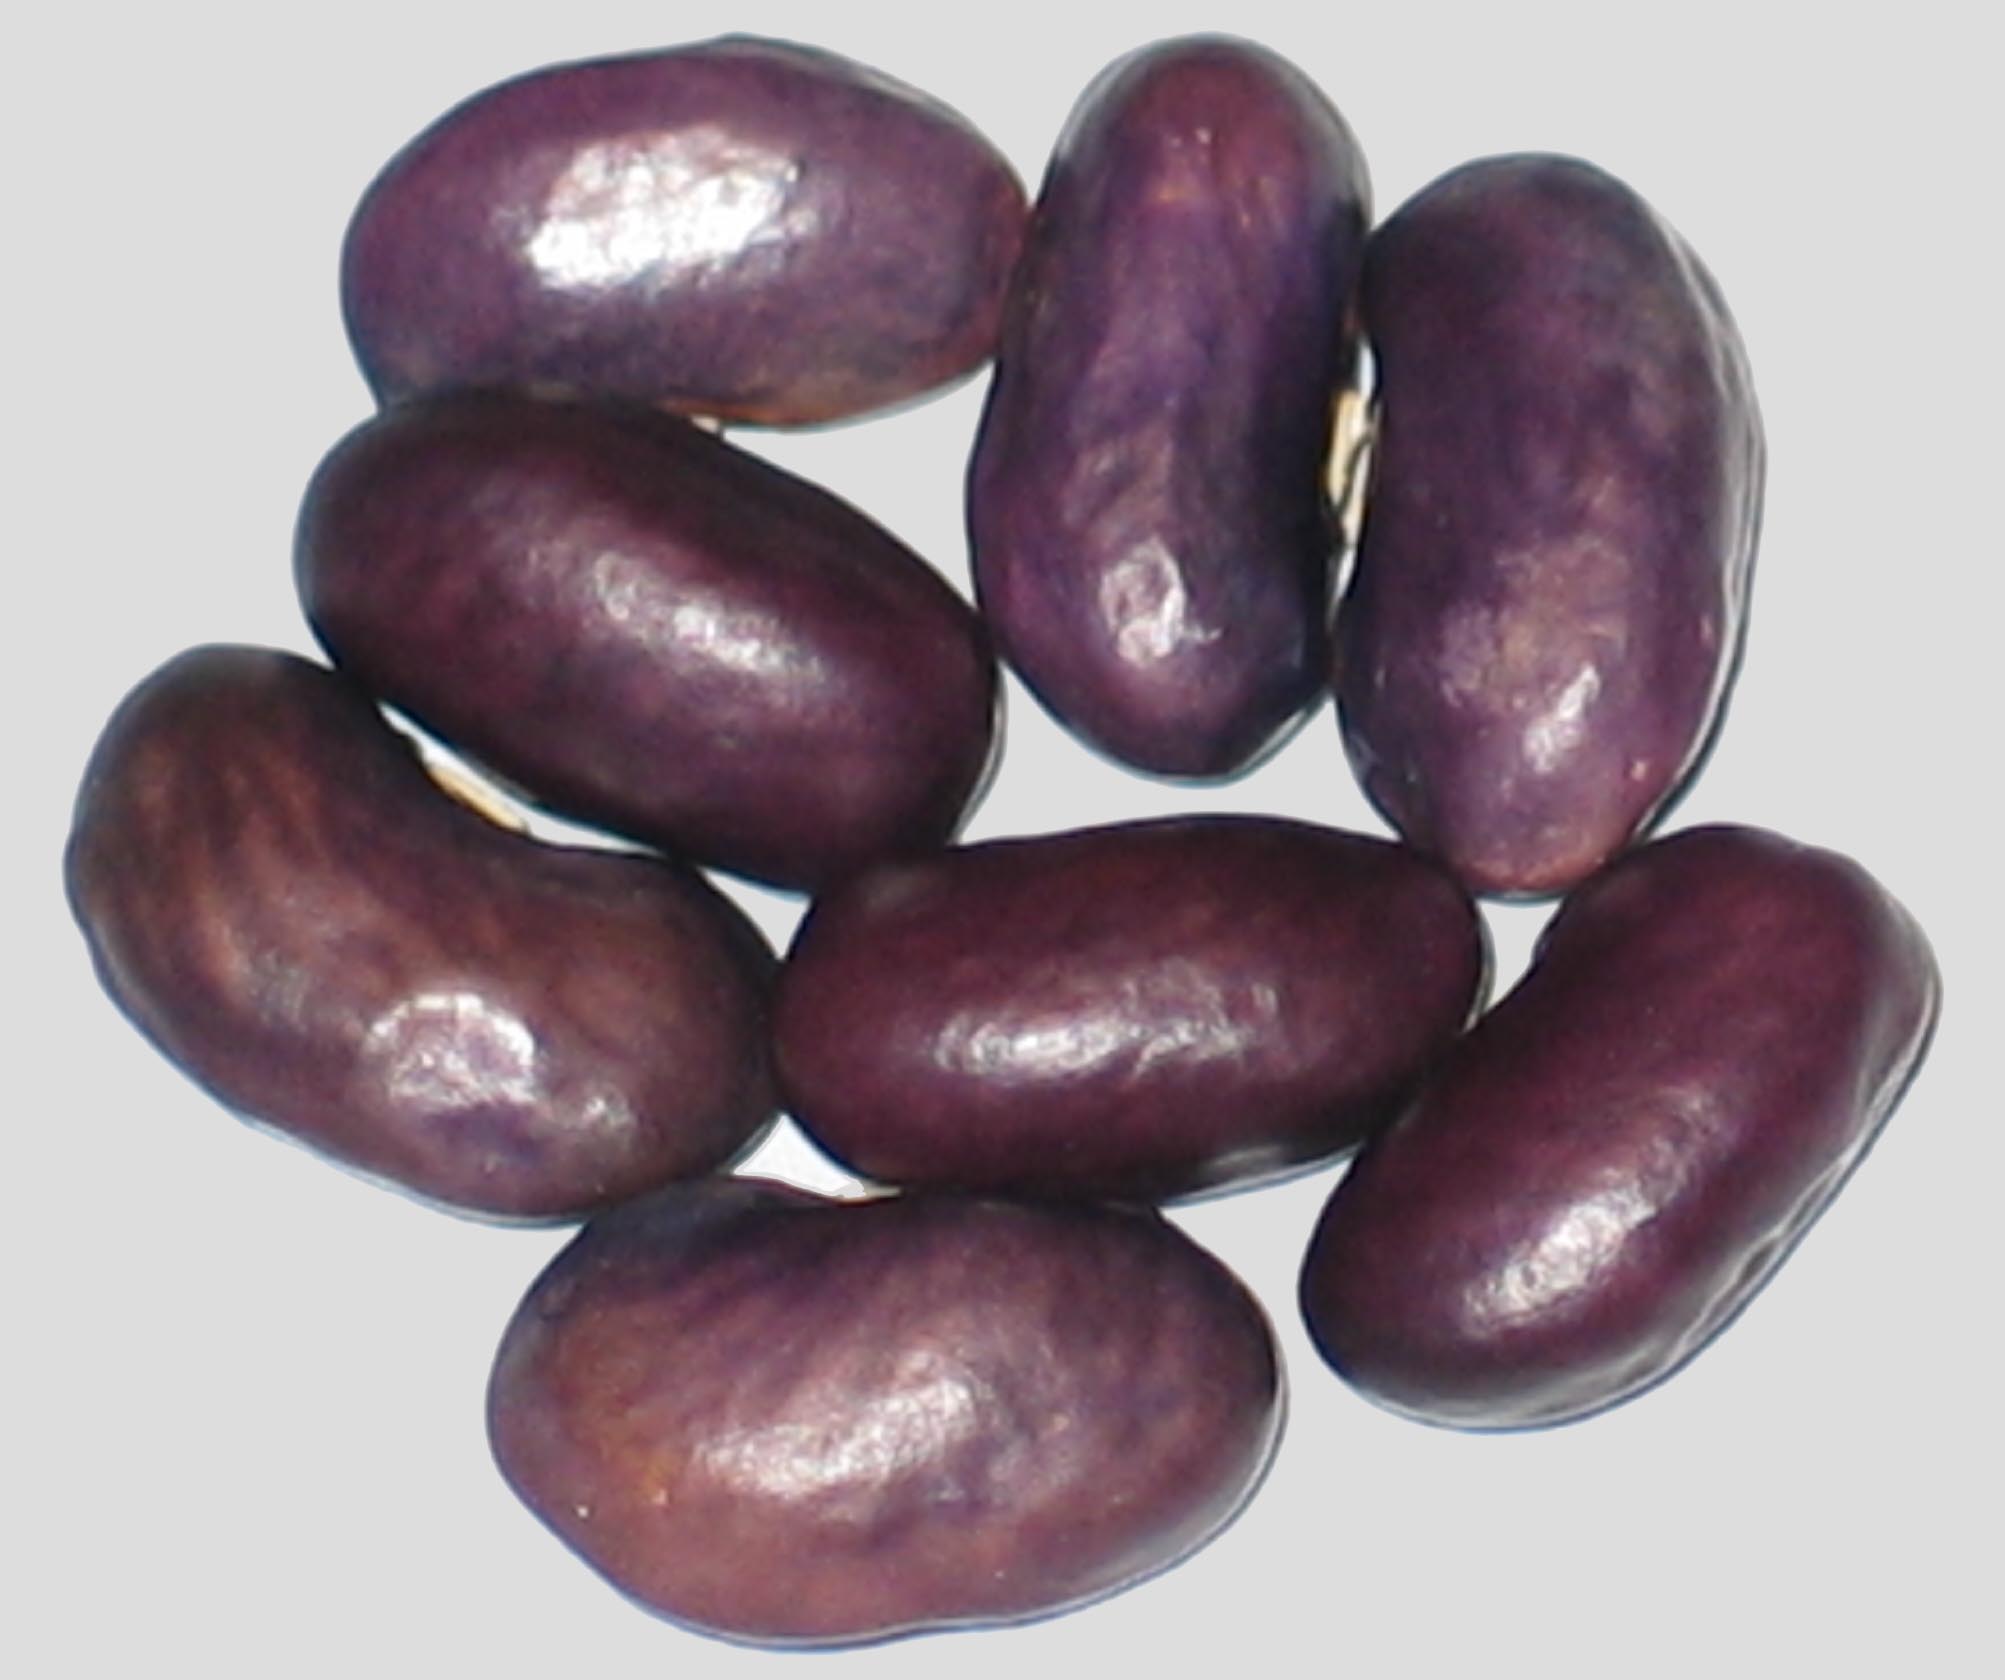 image of Tyra beans